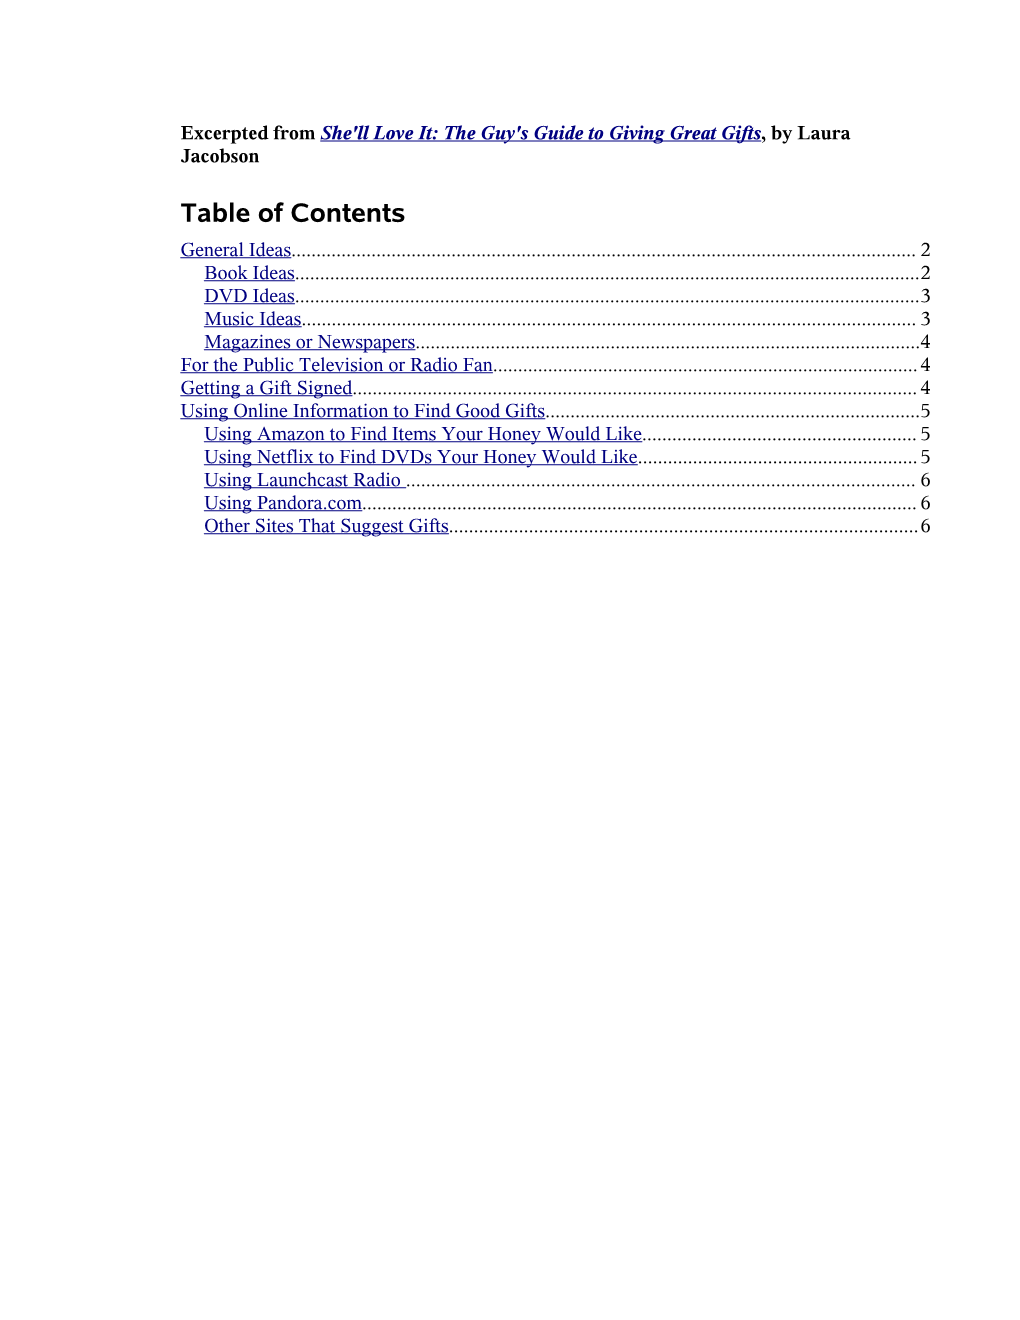 Table of Contents General Ideas